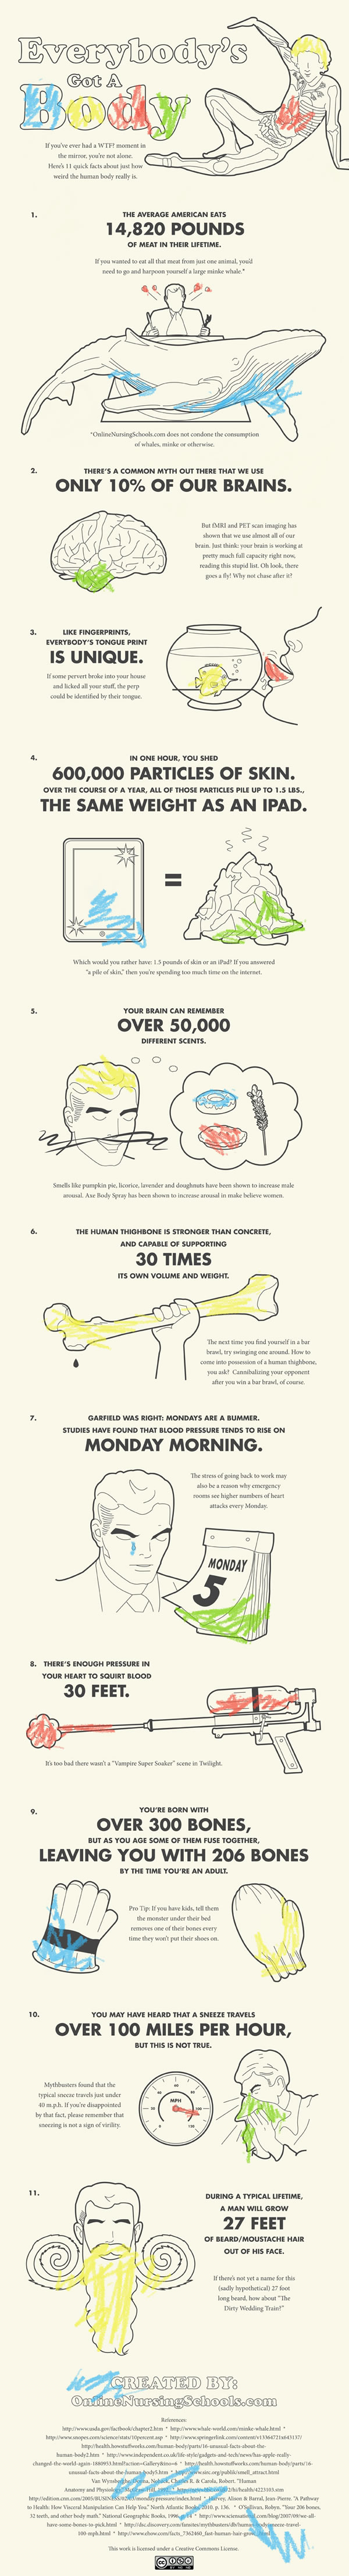 11 Weird Facts About The Human Body Infographic